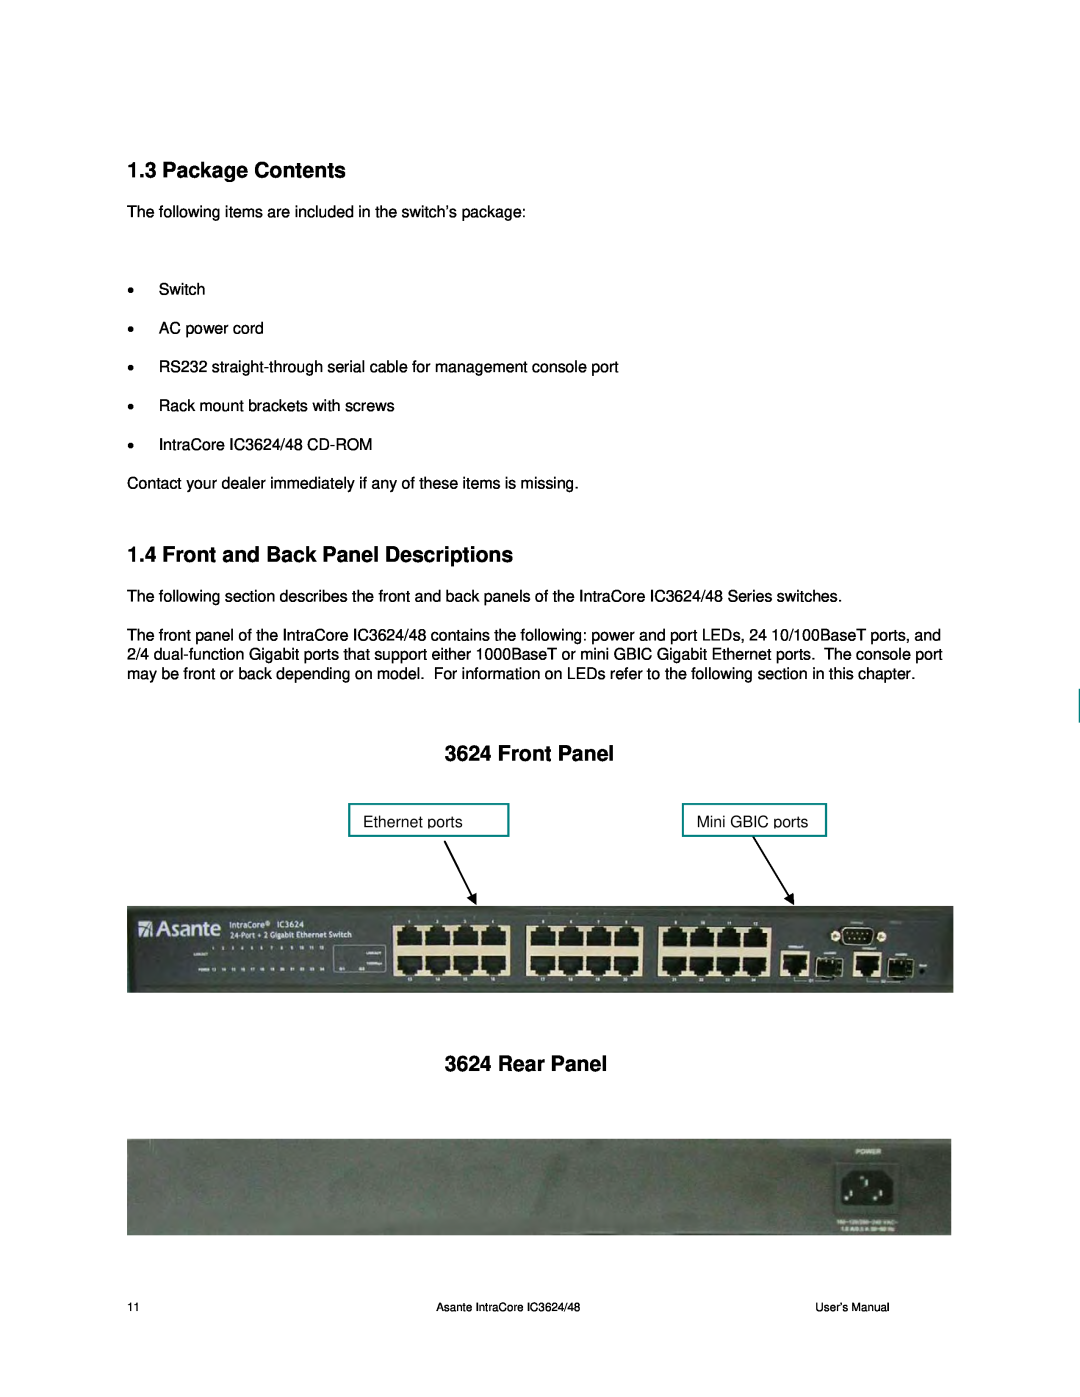 Asante Technologies 3624/48 user manual Package Contents, Front and Back Panel Descriptions, Front Panel, Rear Panel 